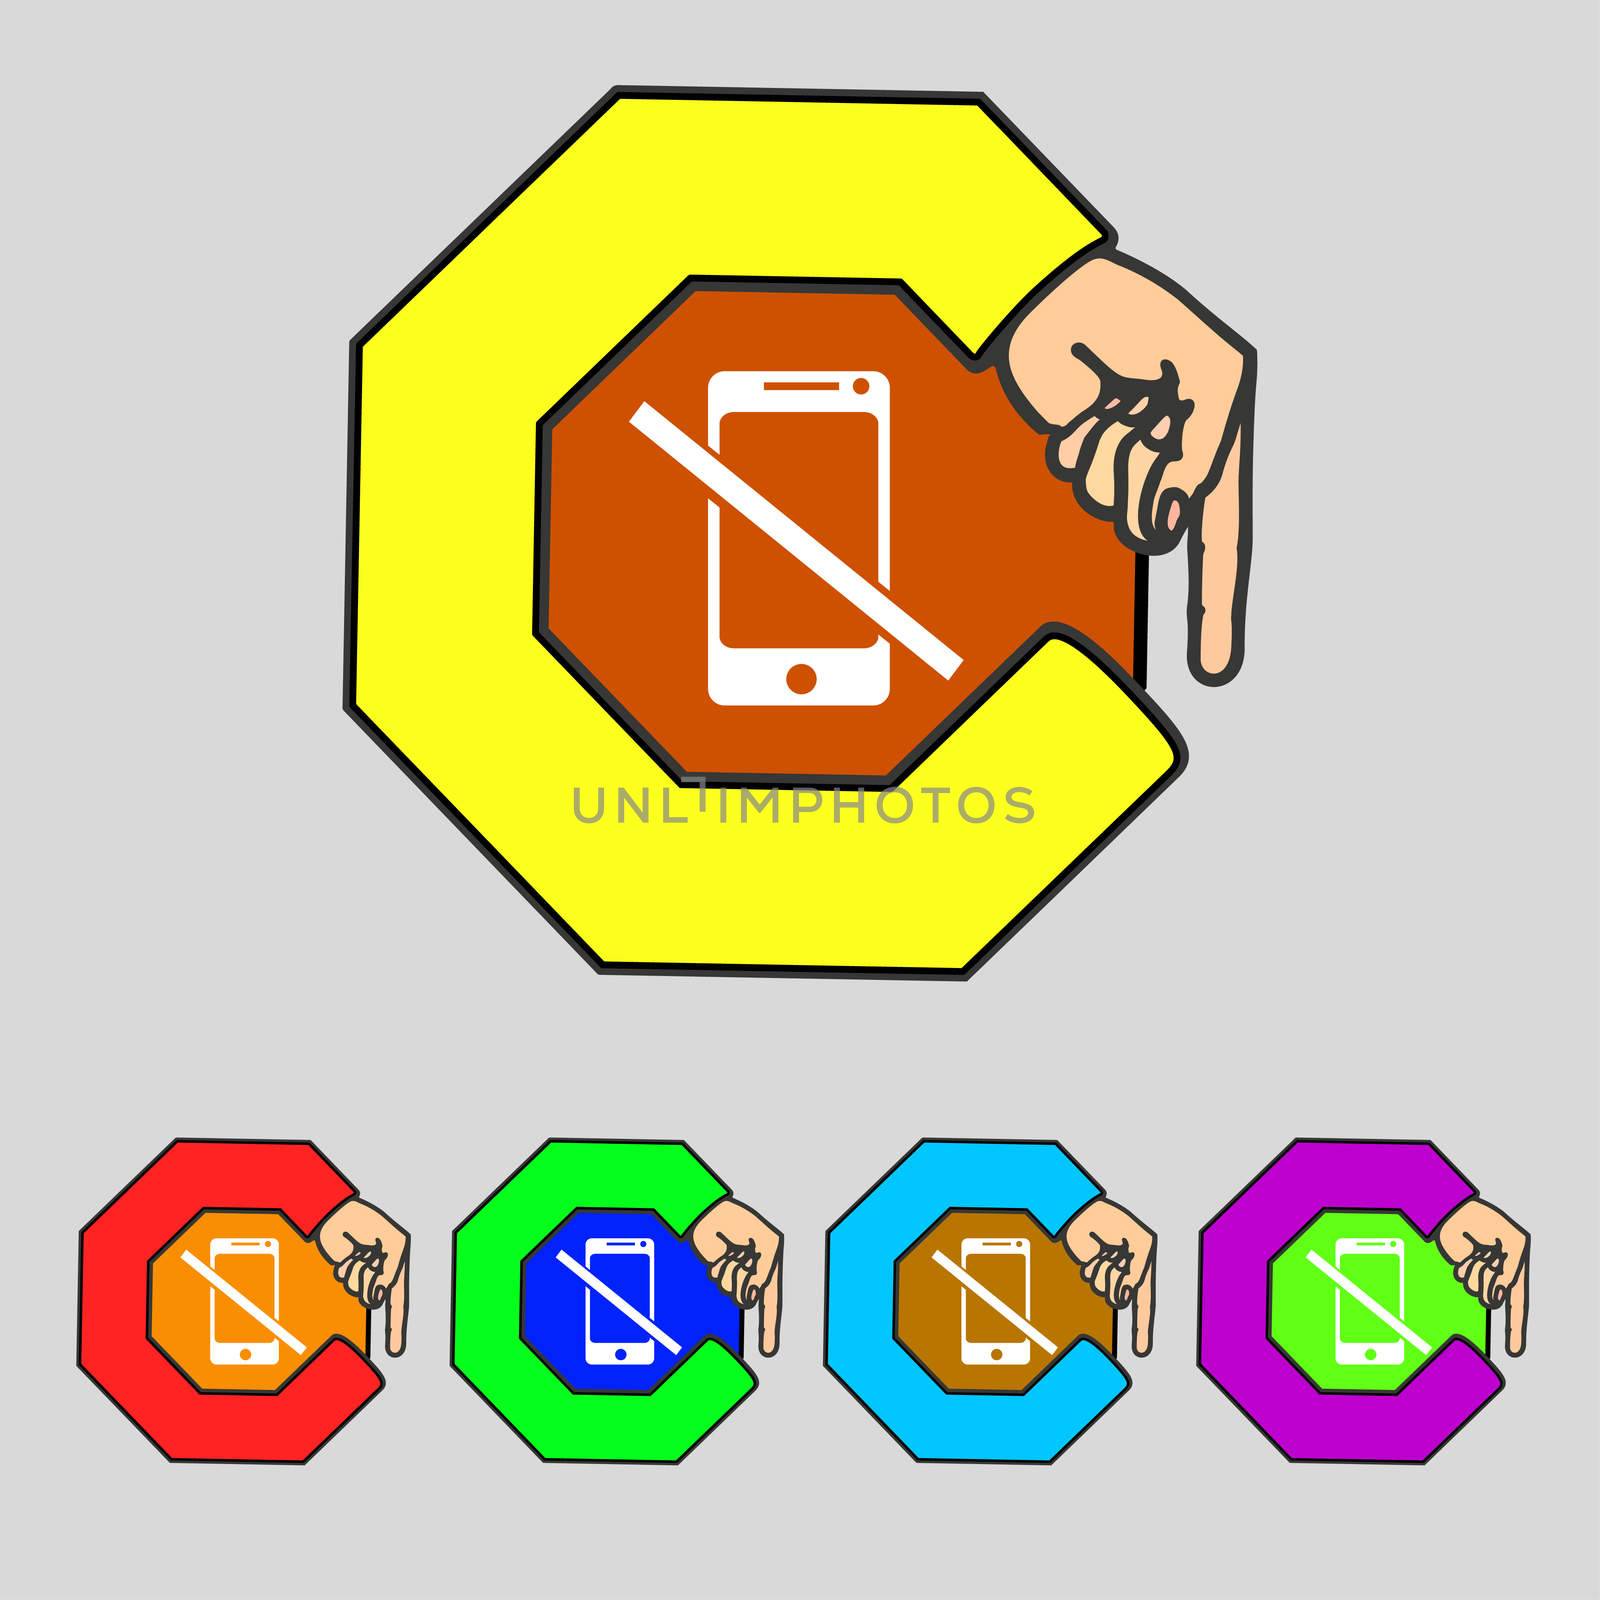 Do not call. Smartphone sign icon. Support symbol. Call center prohibition sign Stop flat symbol illustration